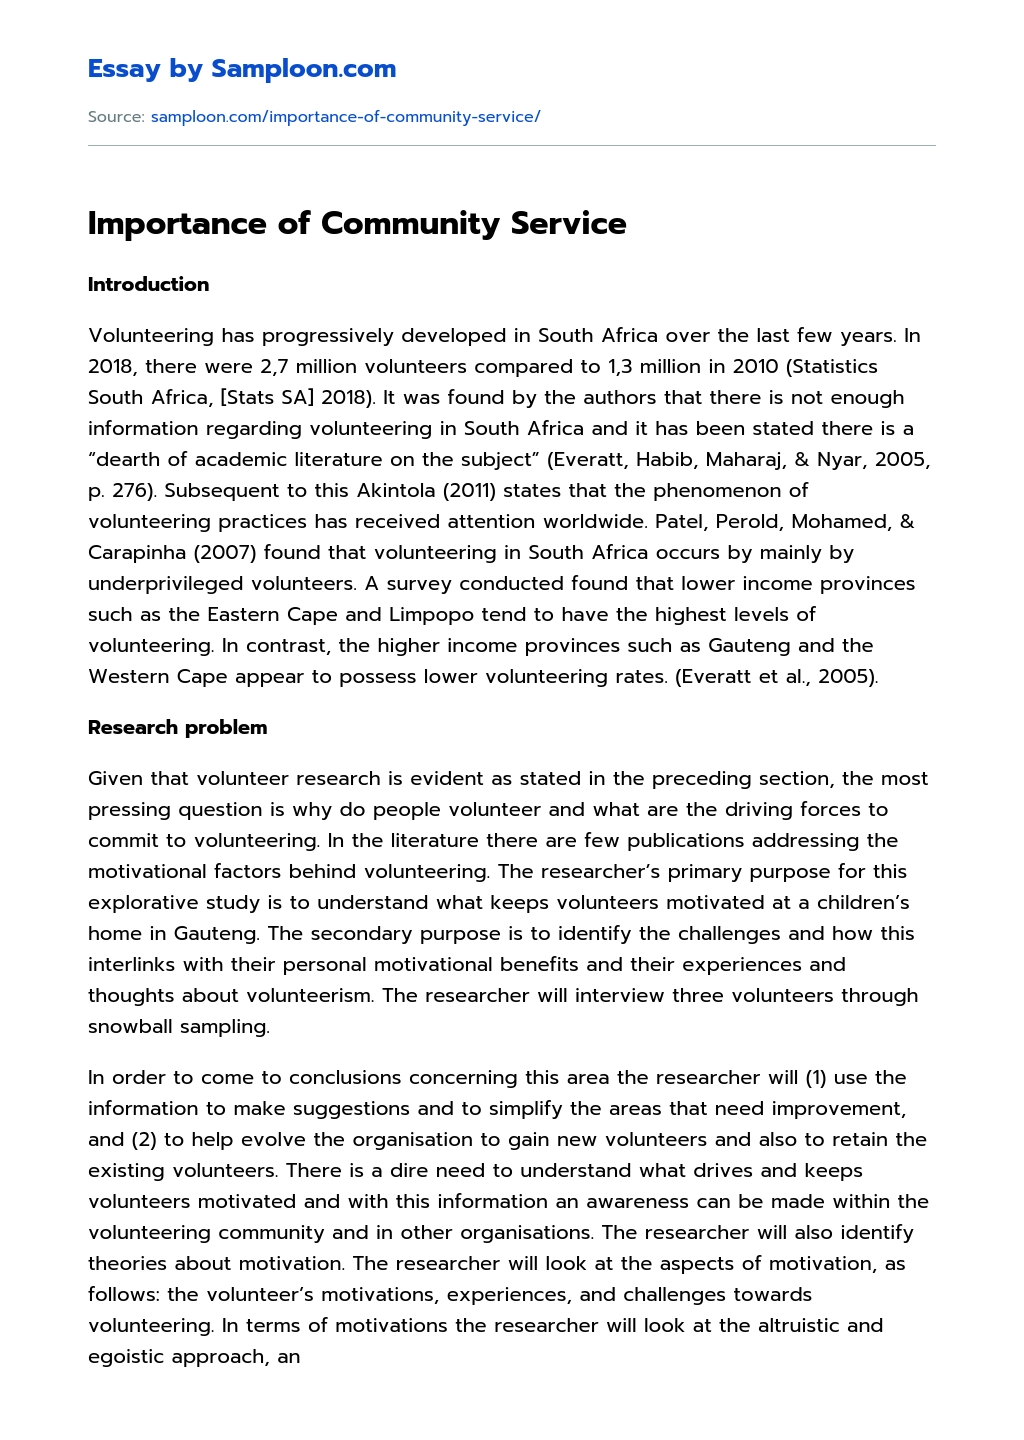 essay on the importance of community service